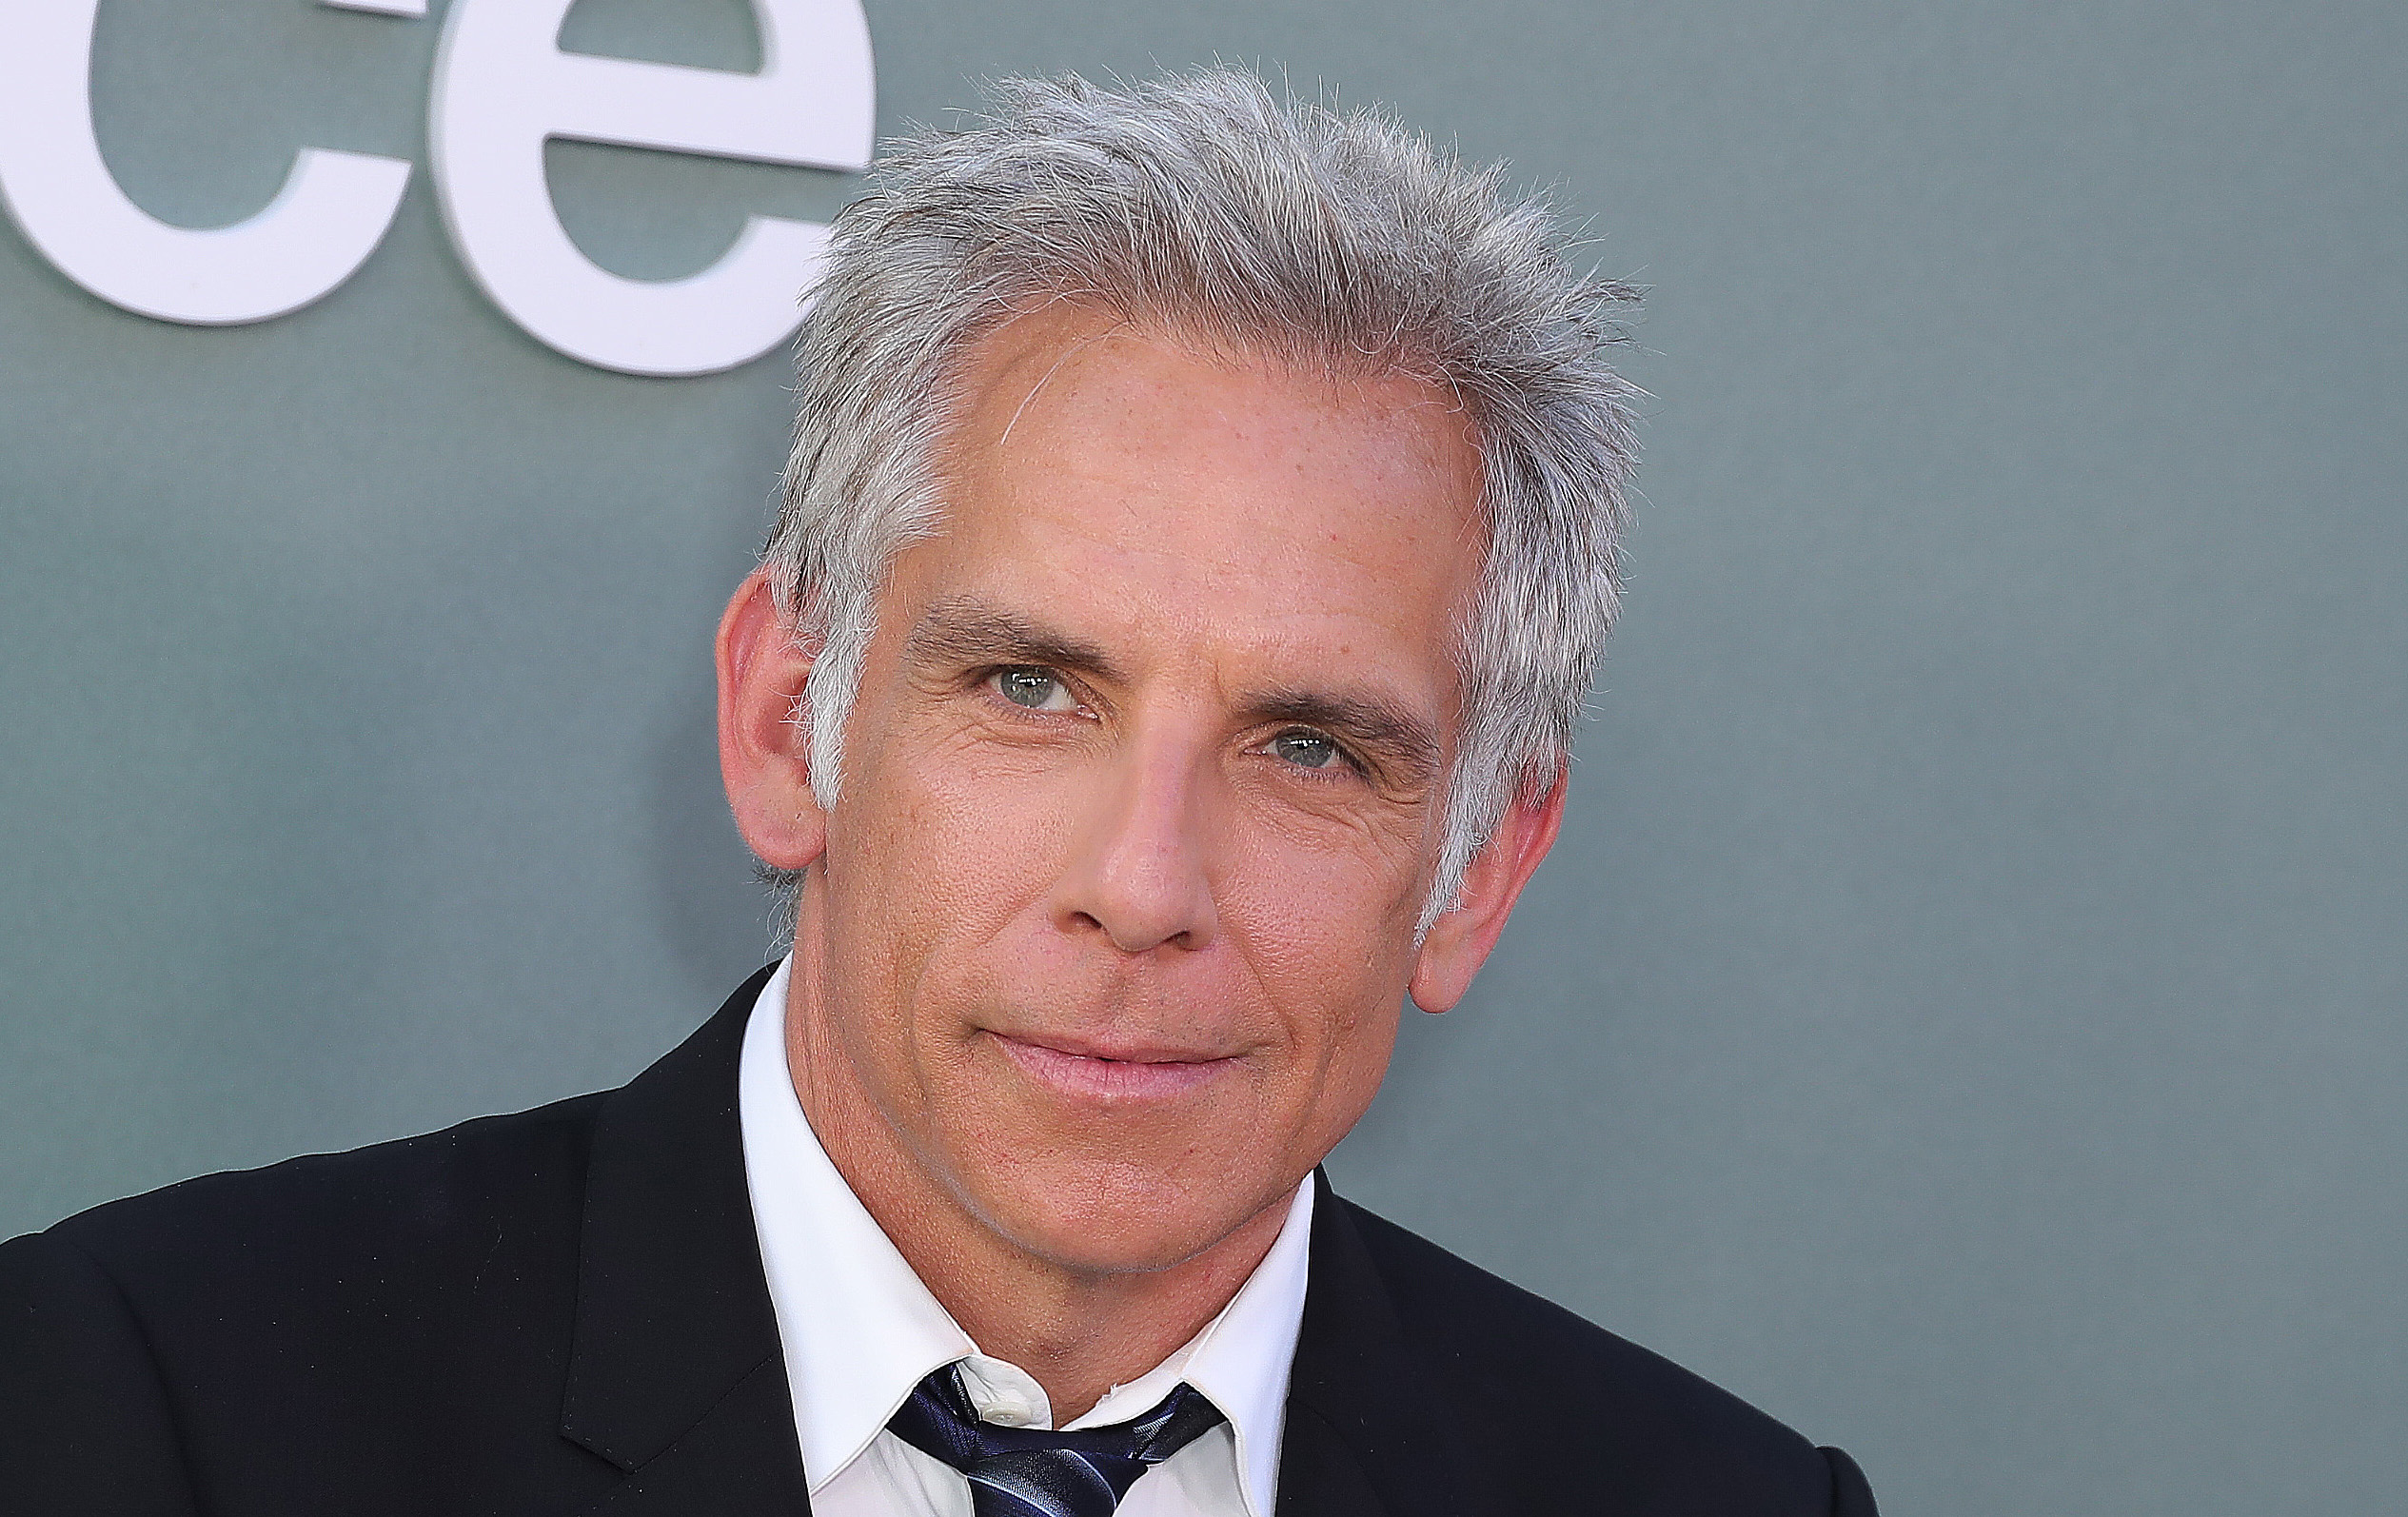 Ben Stiller was surprised by the failure of ‘Zoolander 2’, believing it would be a hit